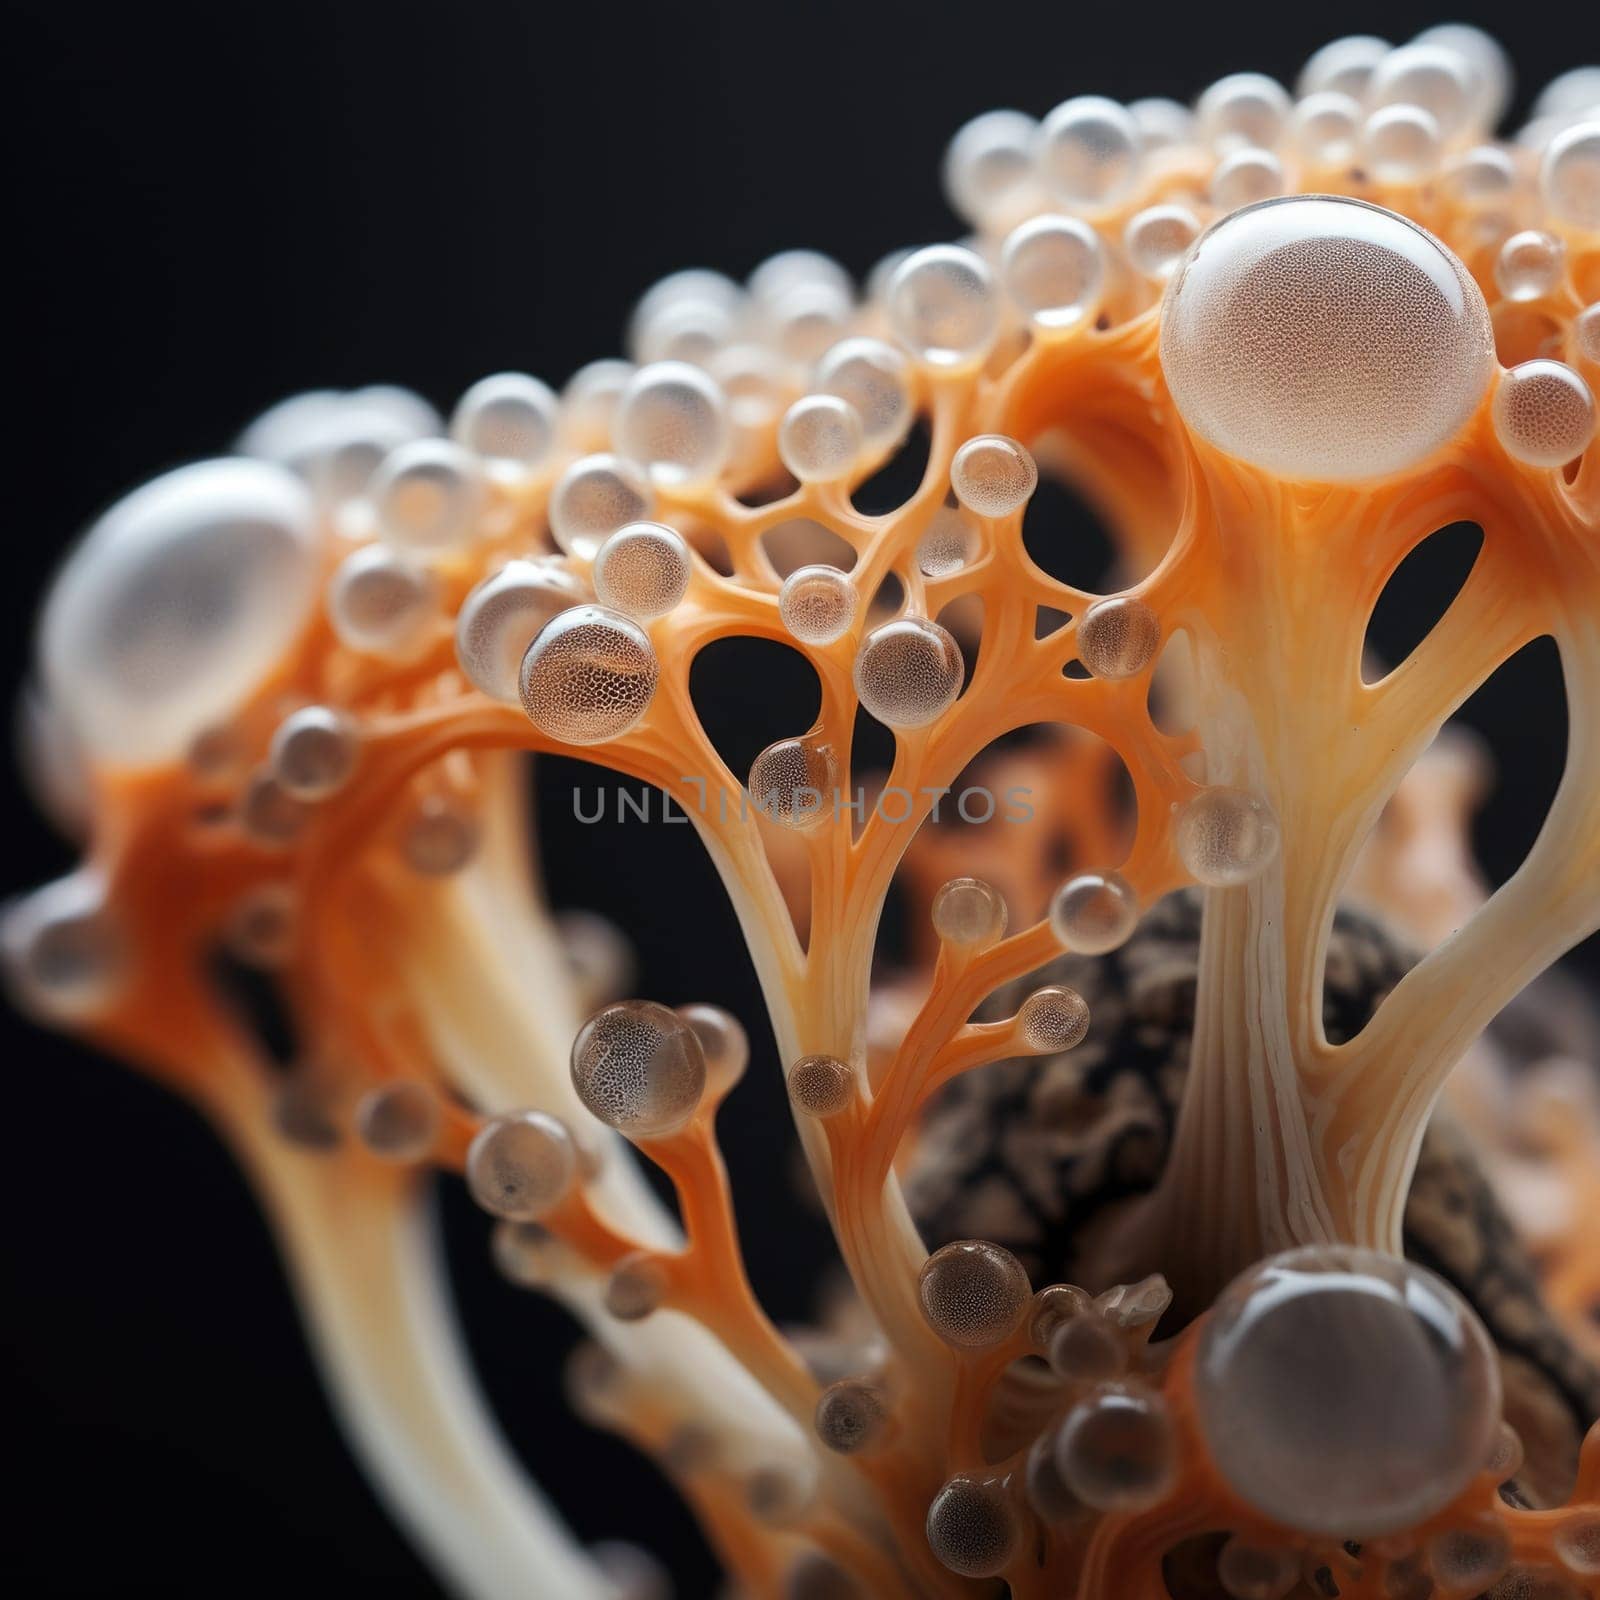 A close up of a mushroom with bubbles on it, AI by starush